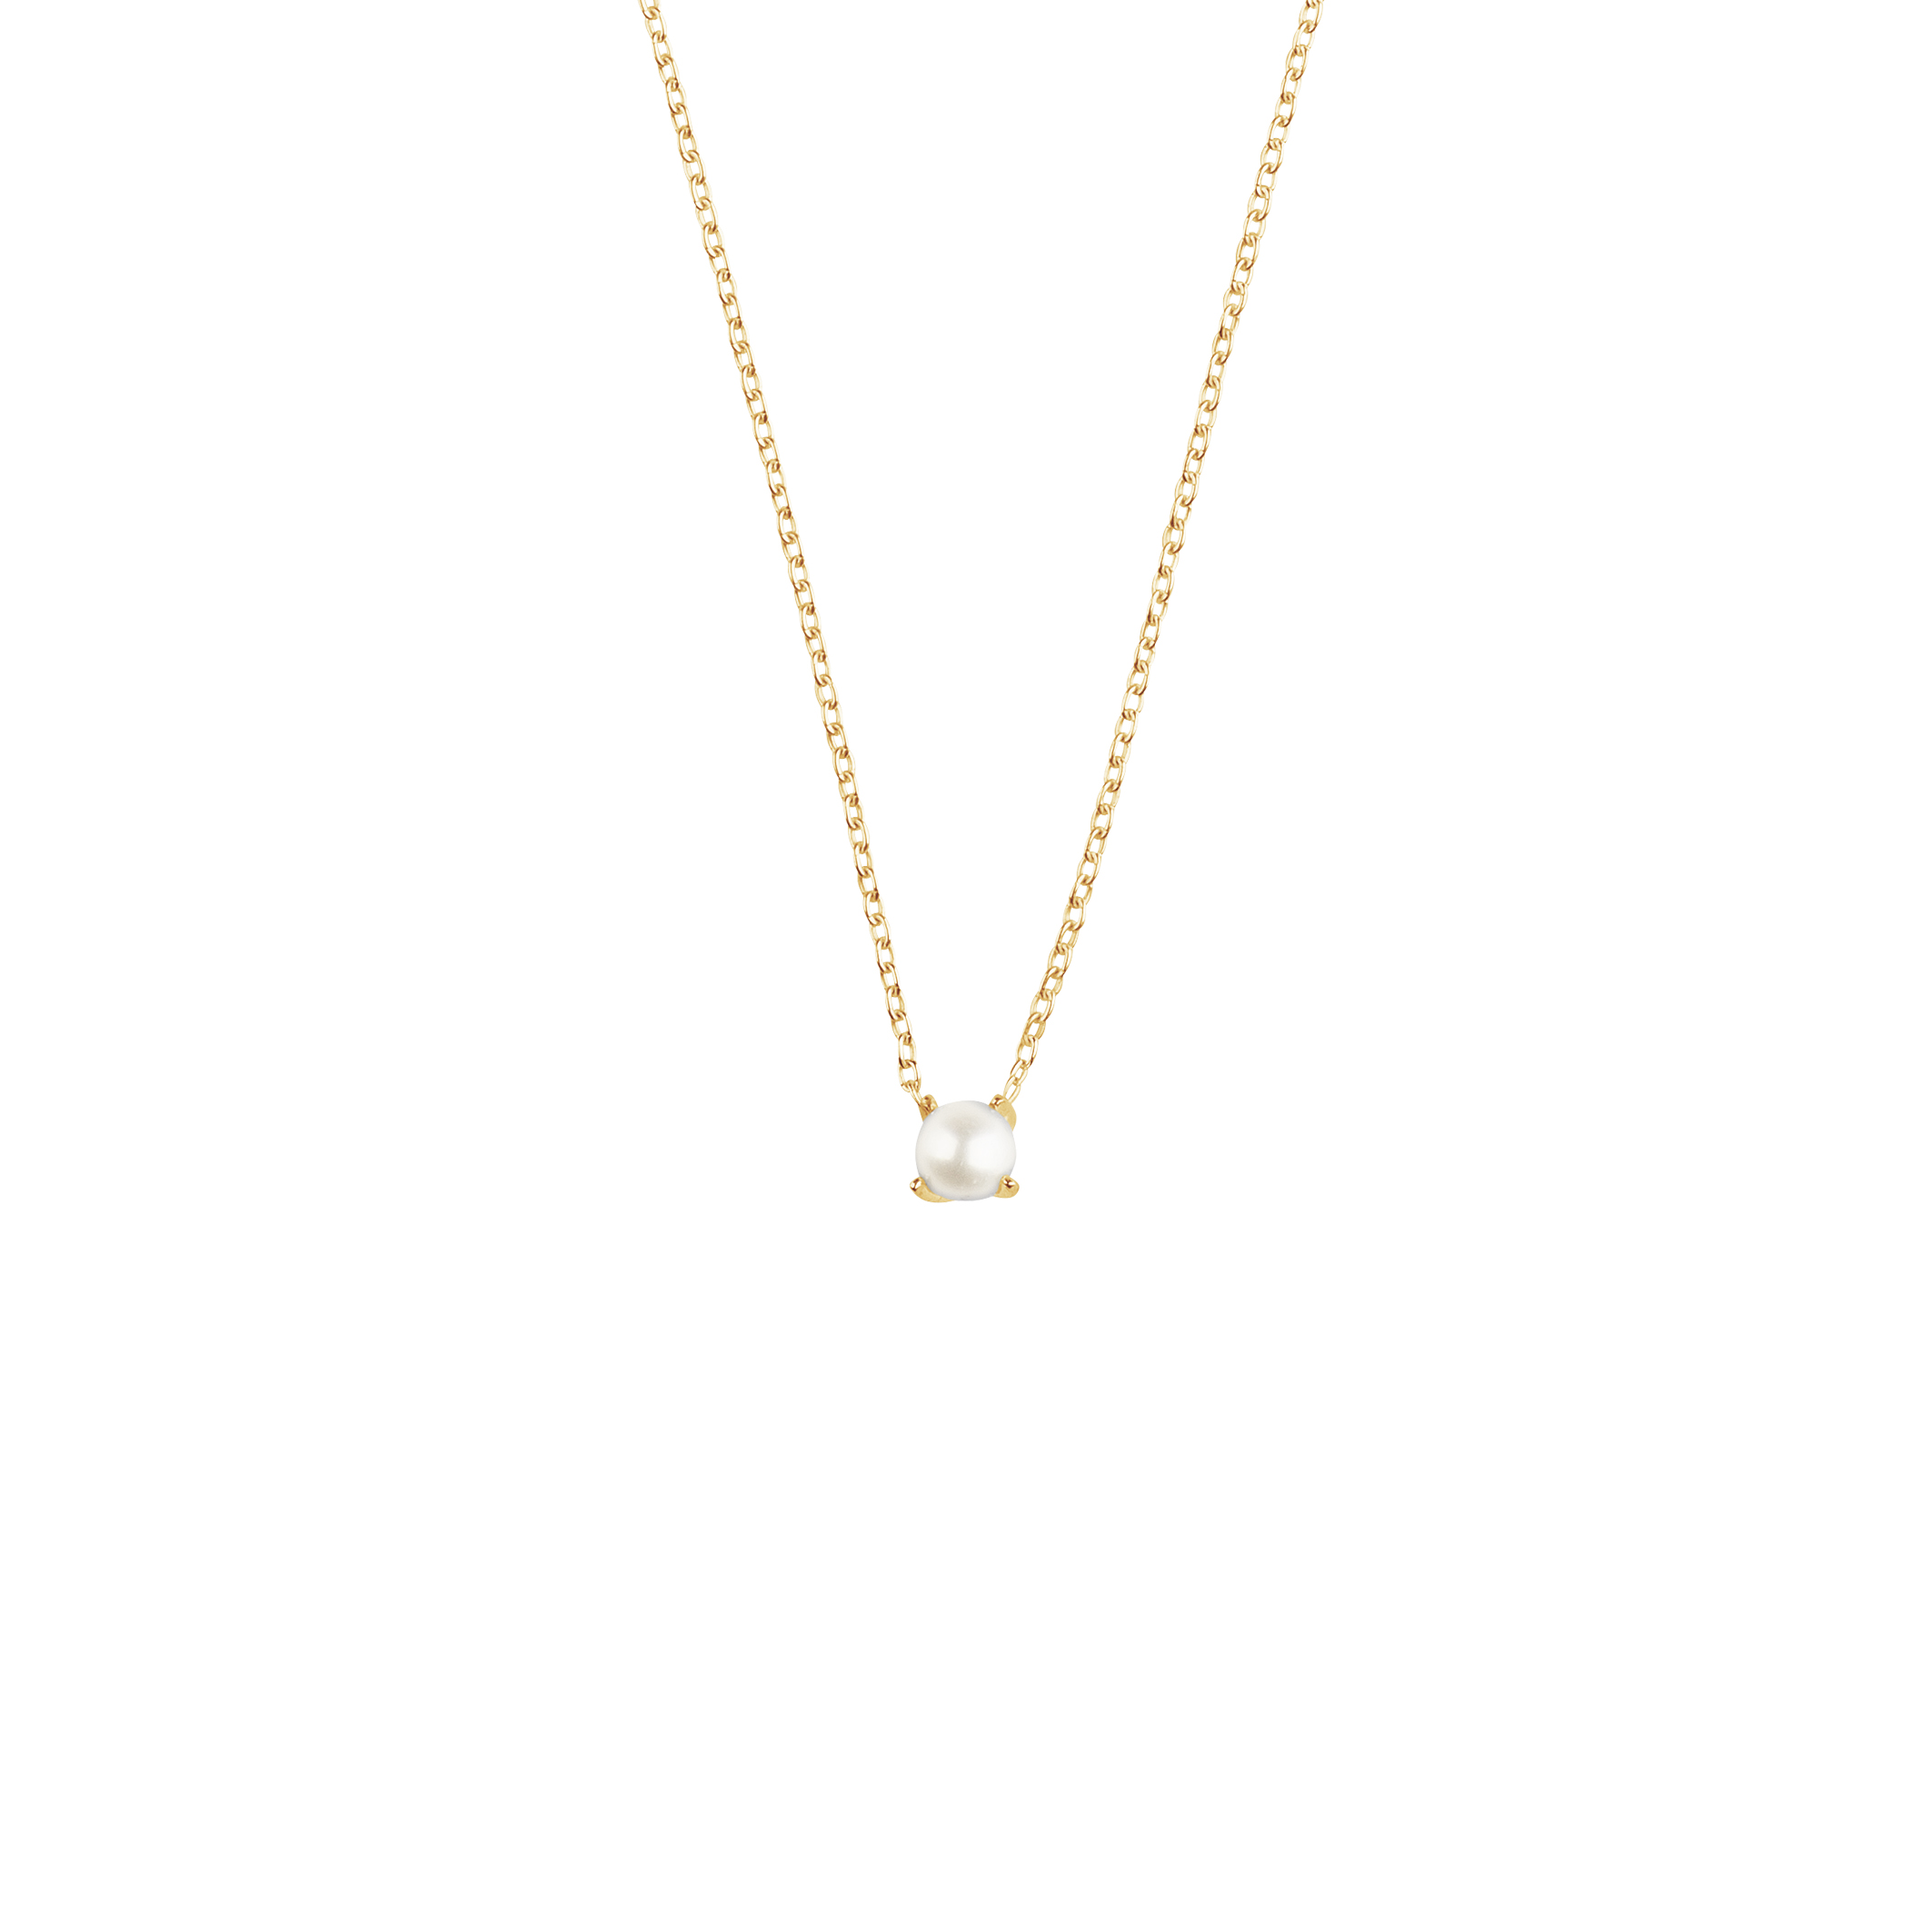 Petite pearl necklace gold